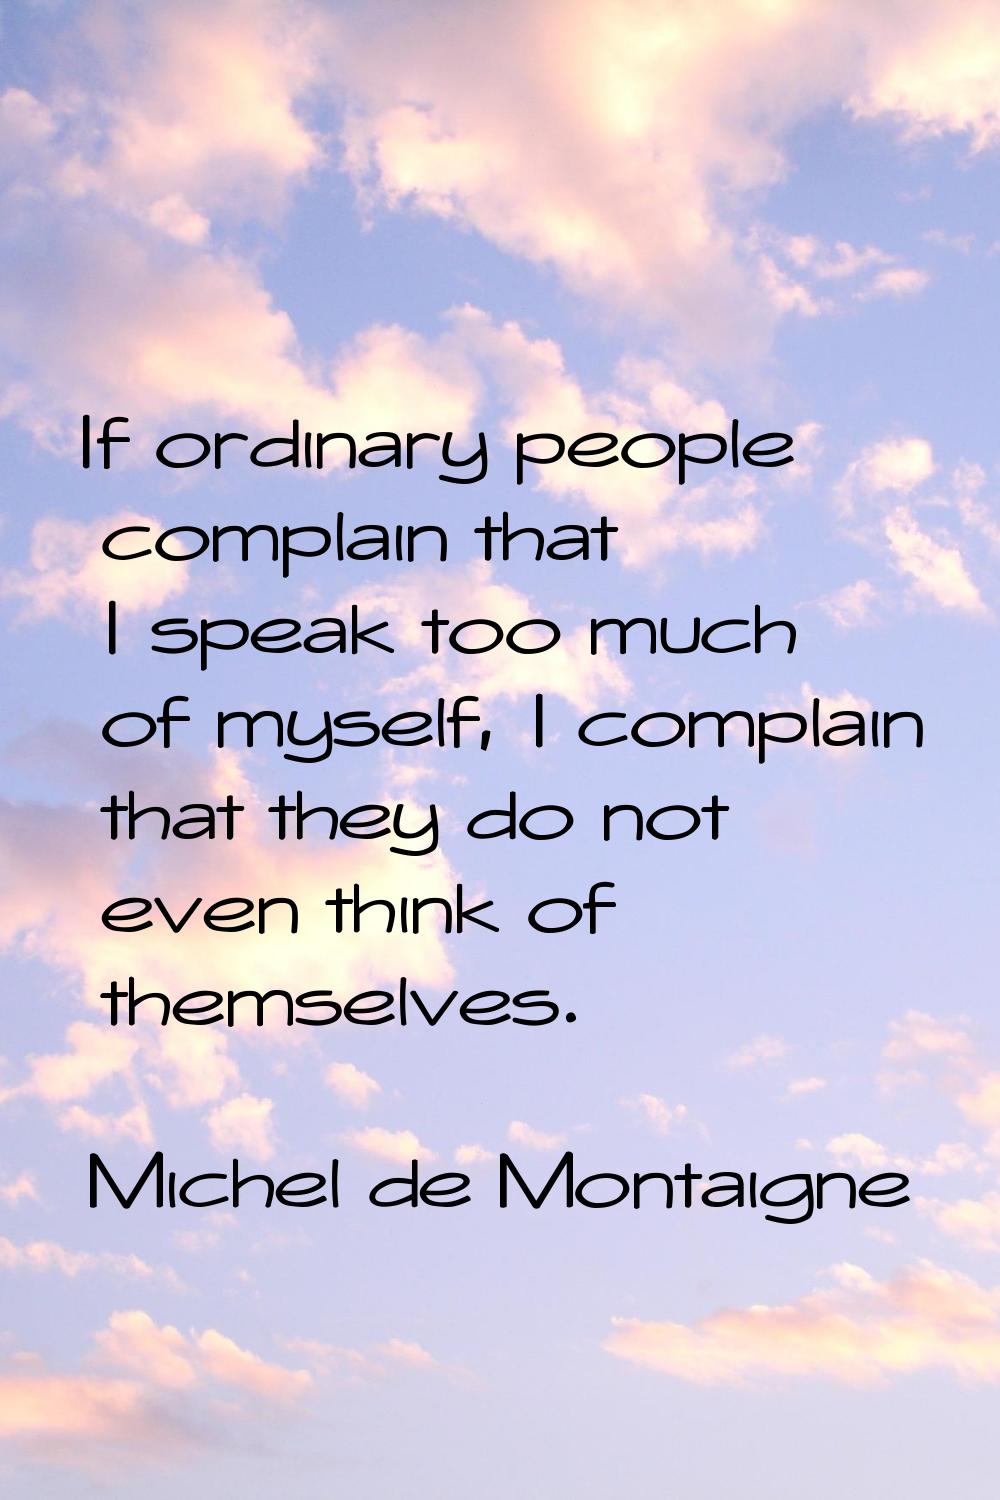 If ordinary people complain that I speak too much of myself, I complain that they do not even think